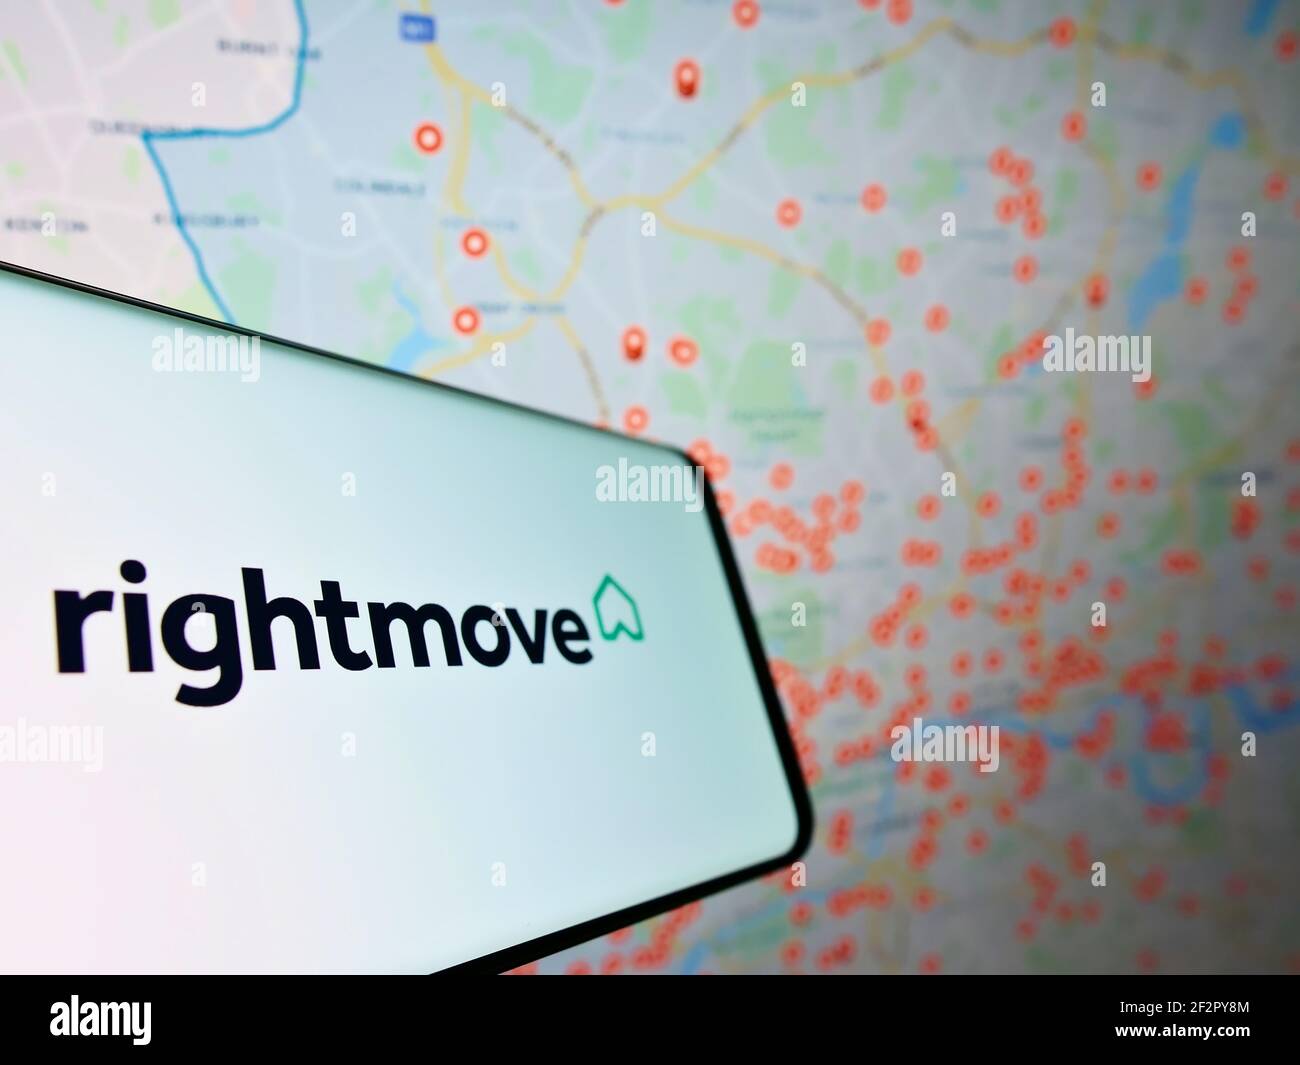 Cellphone with logo of British real estate online portal Rightmove plc on screen in front of website with map. Focus on center of phone display. Stock Photo